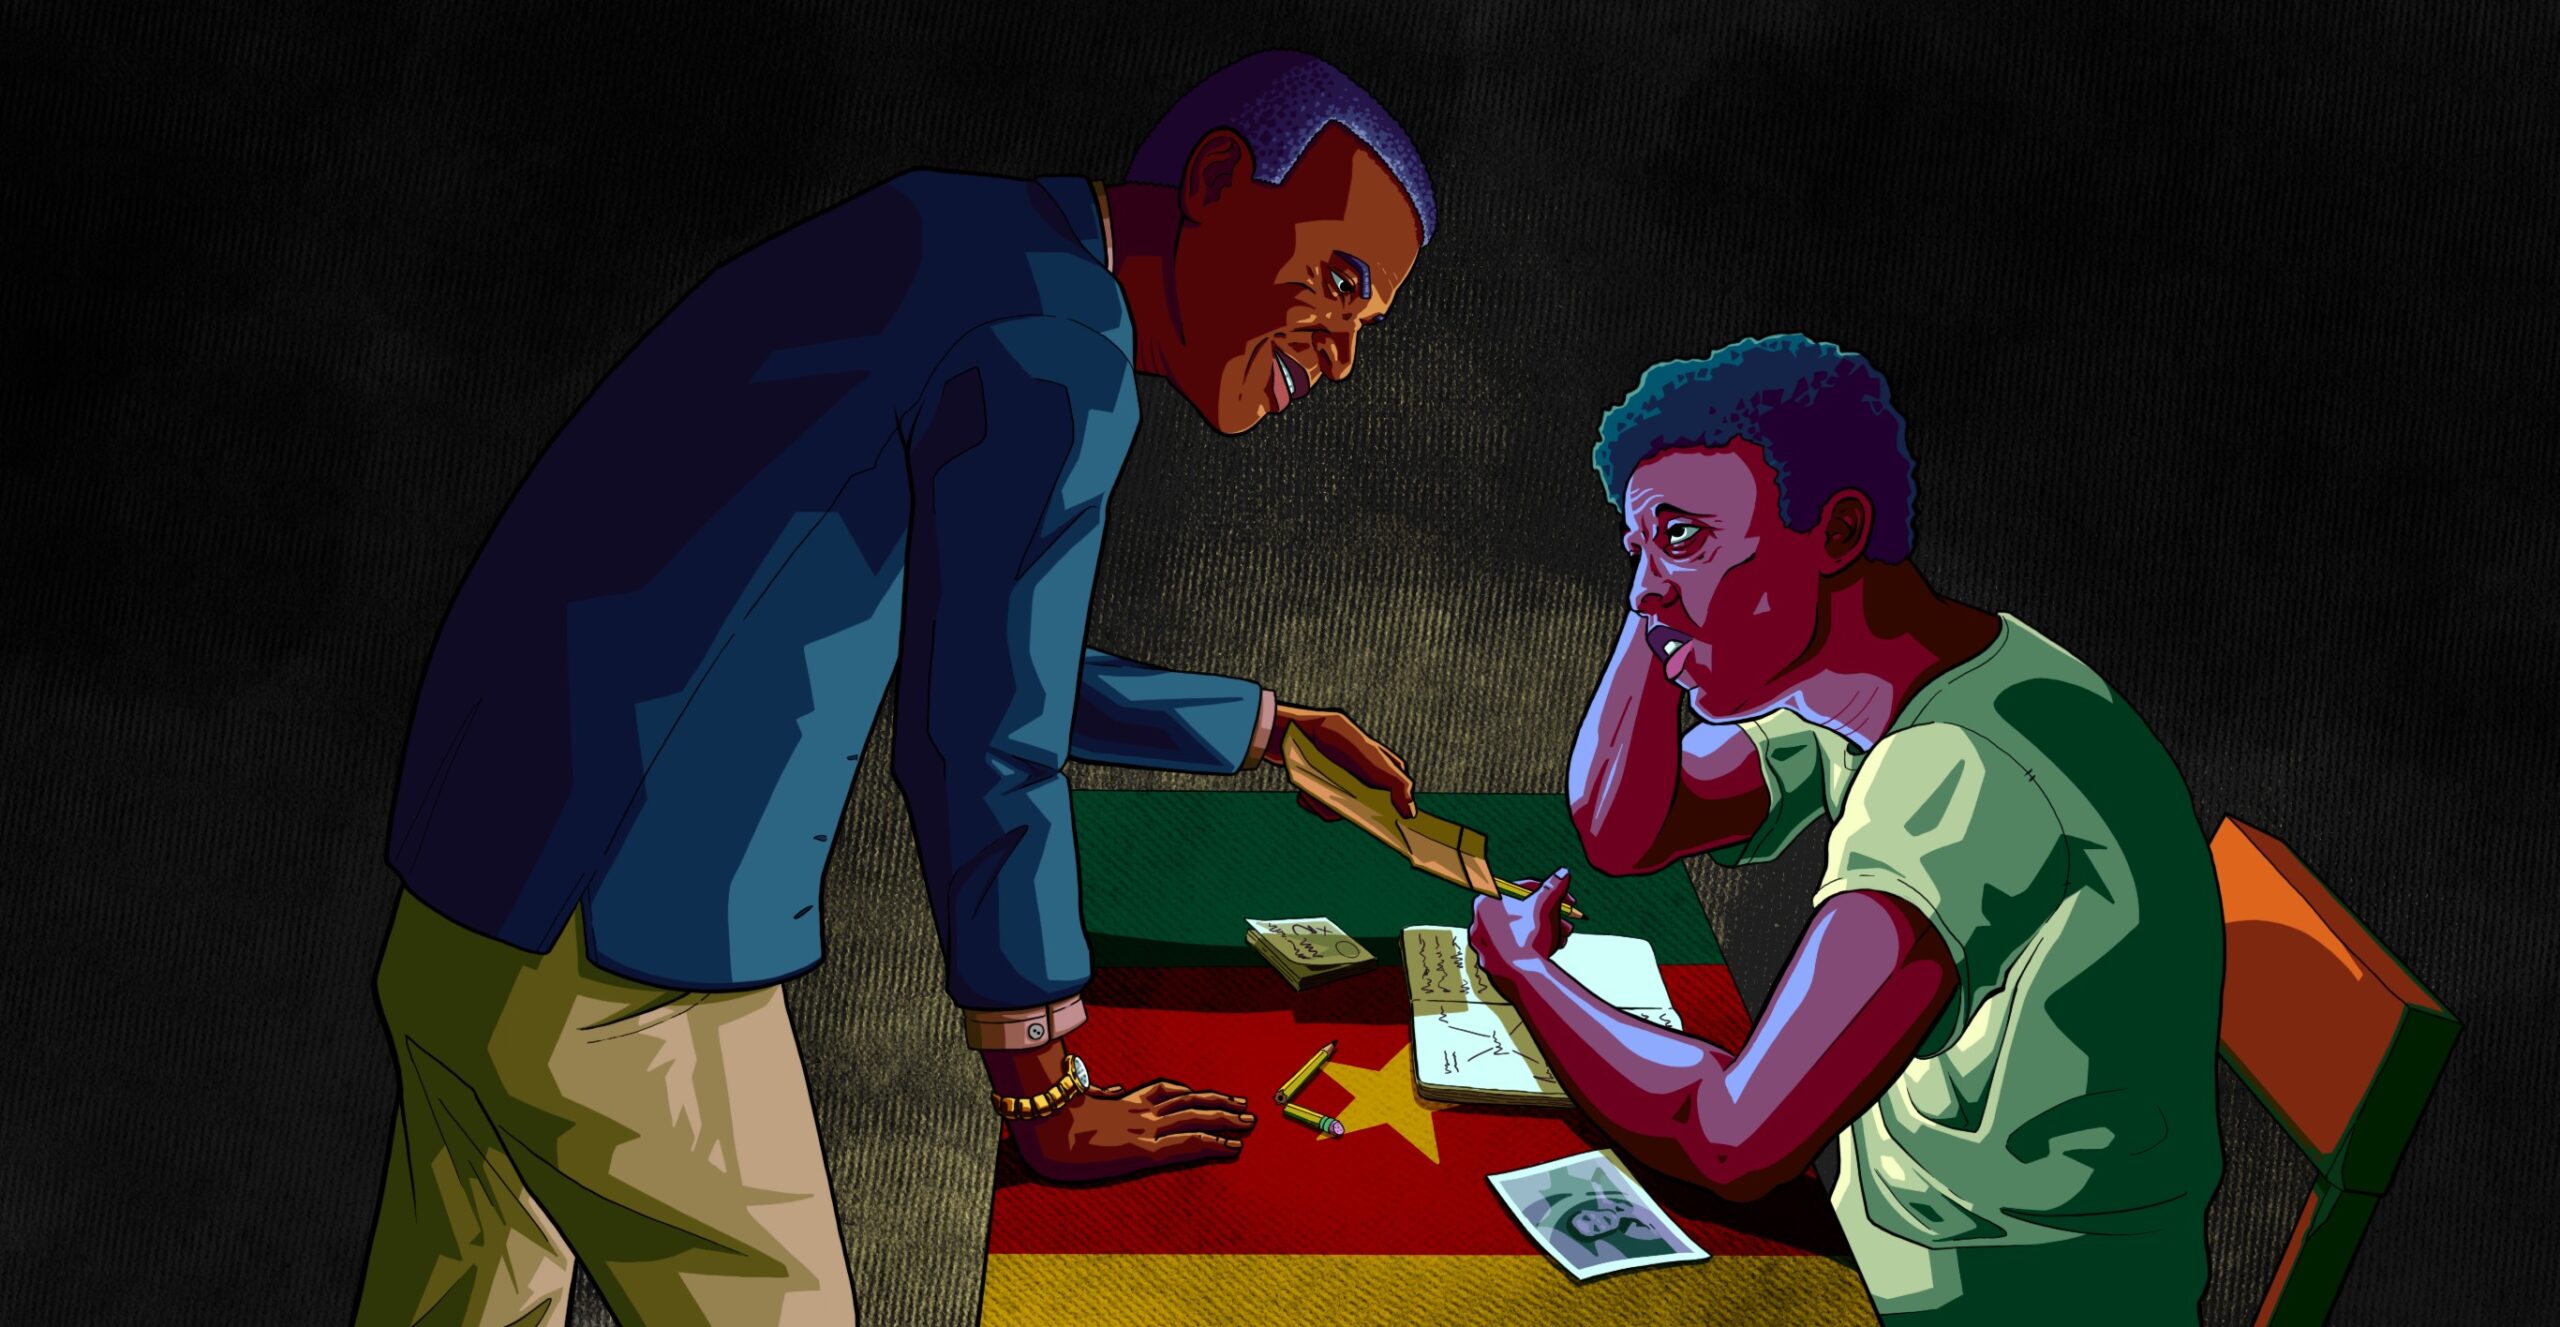 A journalist at a desk draped with the Cameroon flag is offered money in an envelope by a man leaning over him